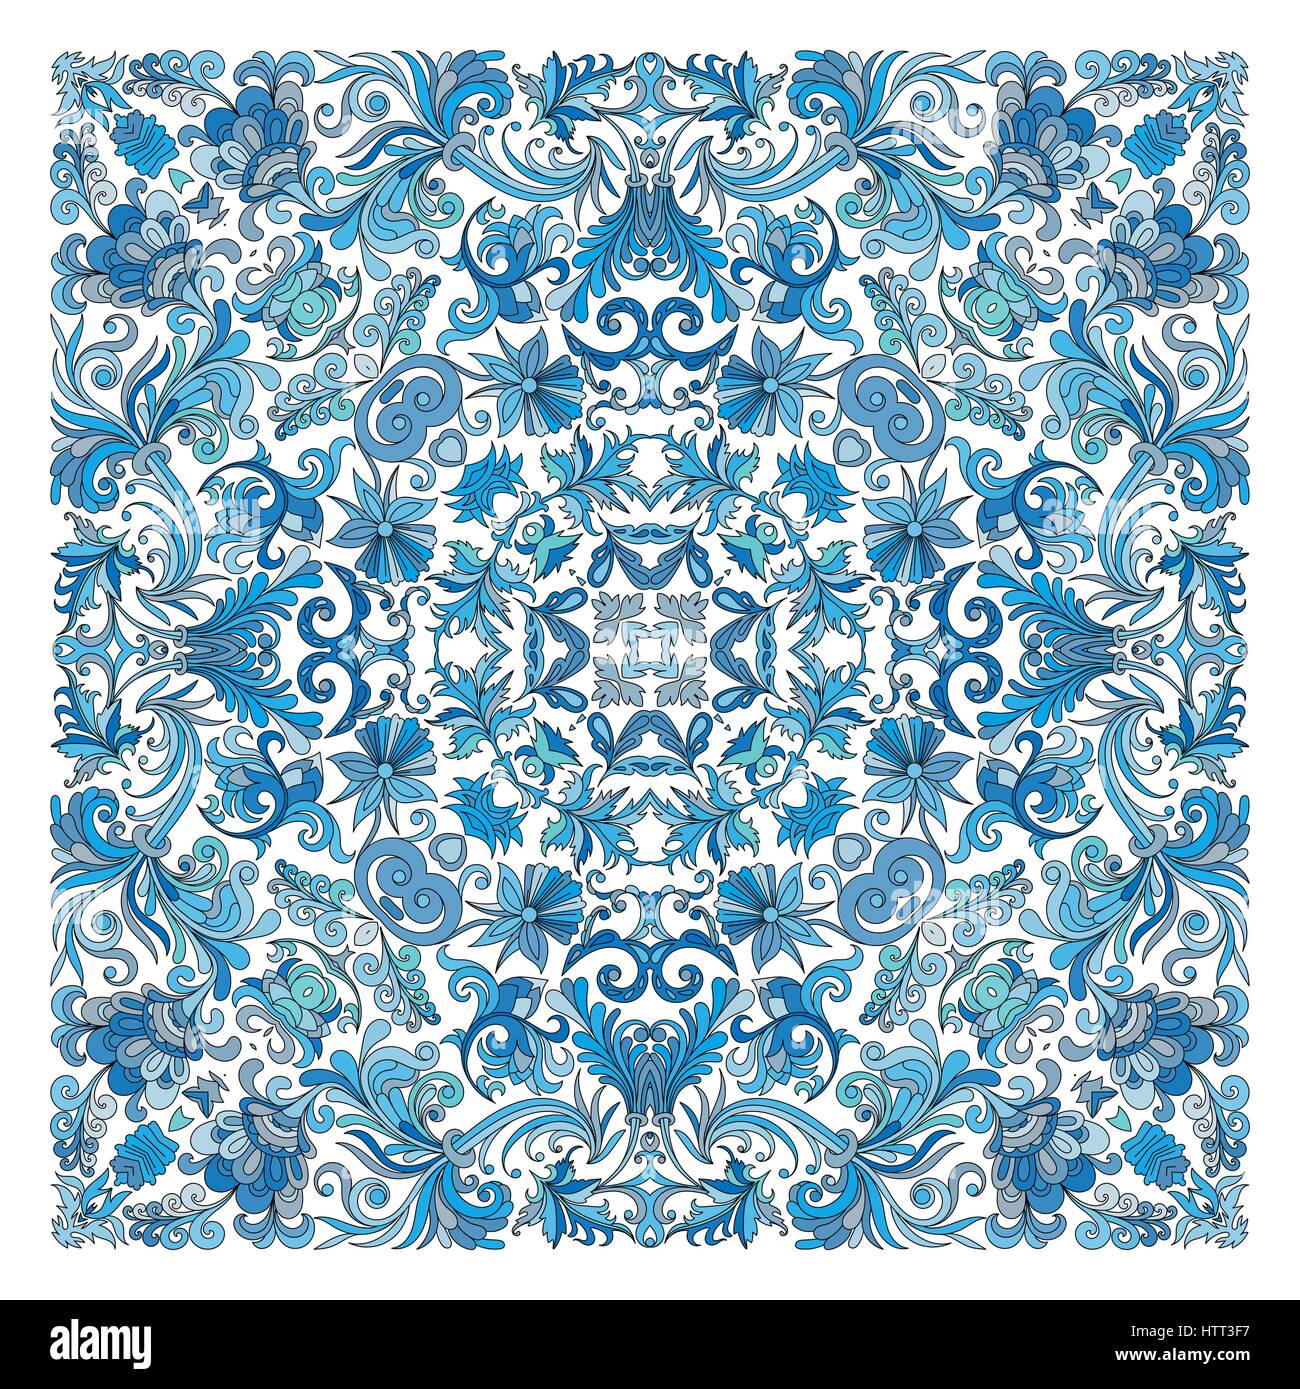 Colorful ornamental floral paisley shawl, bandanna, pillow, scarf. Square pattern. Detailed floral scarf design. Blue brown red eastern ornament on white background. Batik Stock Vector